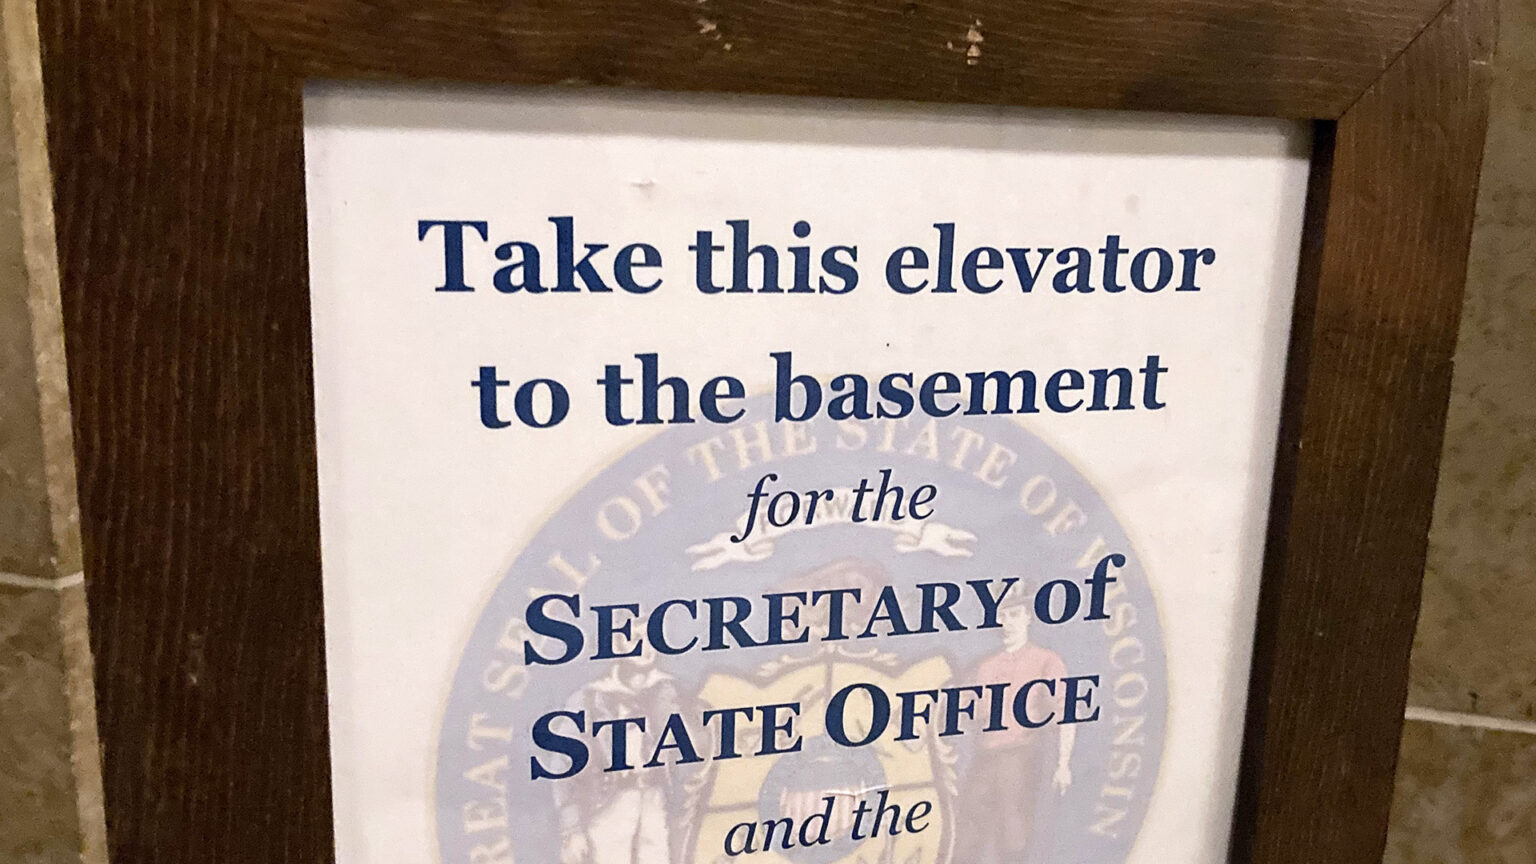 A sign in the Wisconsin State Capitol reads Take this elevator to the basement for the Secretary of State Office and the... with the remaining portion out of frame.